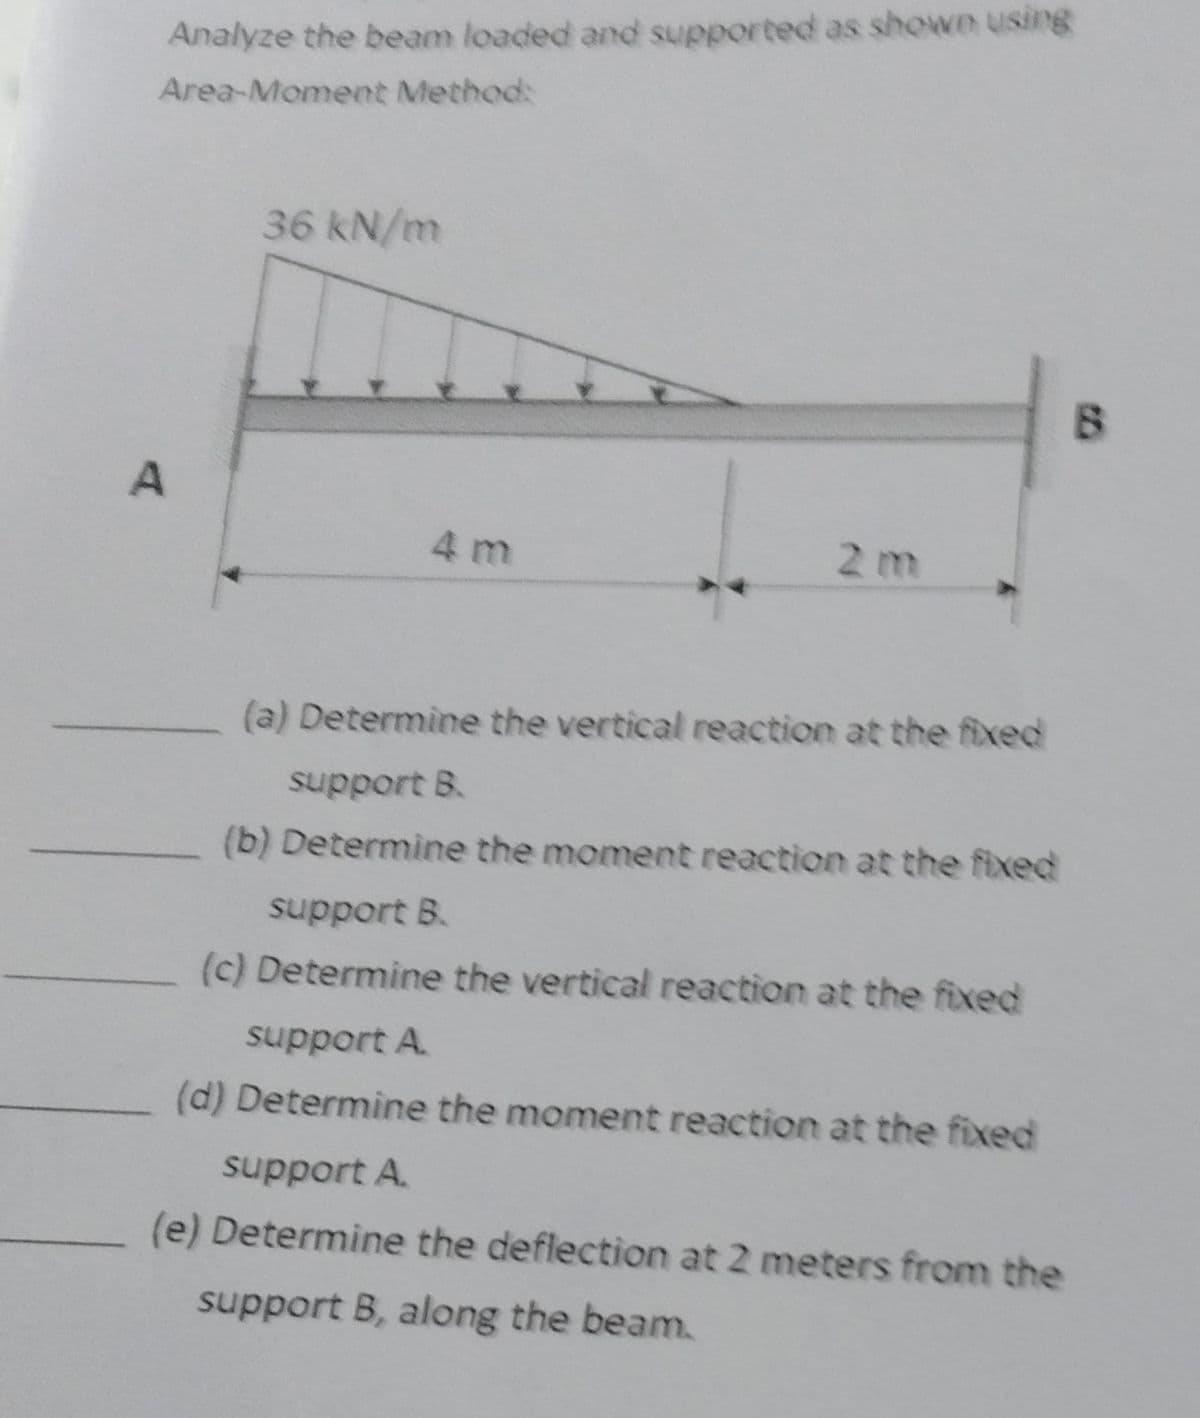 Analyze the beam loaded and supported as shown using
Area-Moment Method:
A
36 kN/m
4 m
2 m
(a) Determine the vertical reaction at the fixed
support B.
(b) Determine the moment reaction at the fixed
support B.
(c) Determine the vertical reaction at the fixed
support A
(d) Determine the moment reaction at the fixed
support A
(e) Determine the deflection at 2 meters from the
support B, along the beam.
B